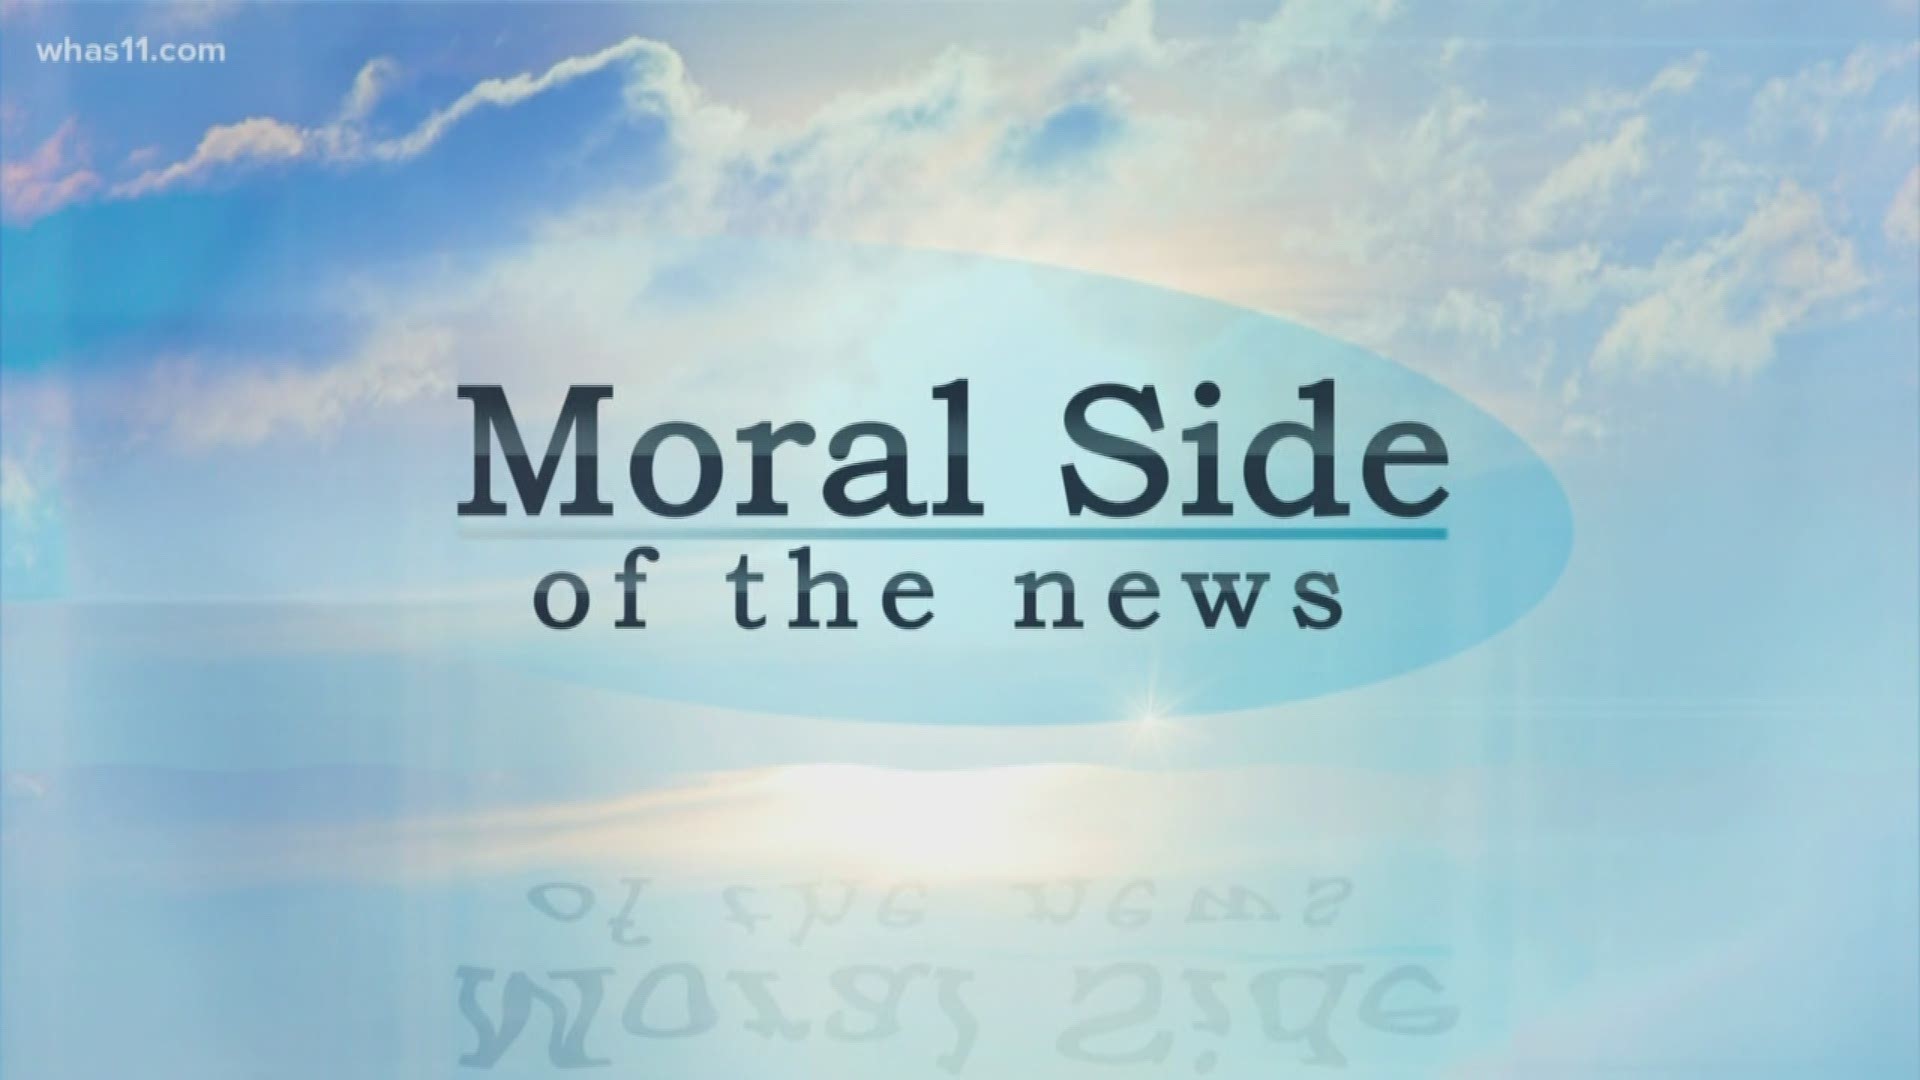 Moral Side of the News: Aug. 16, 2018